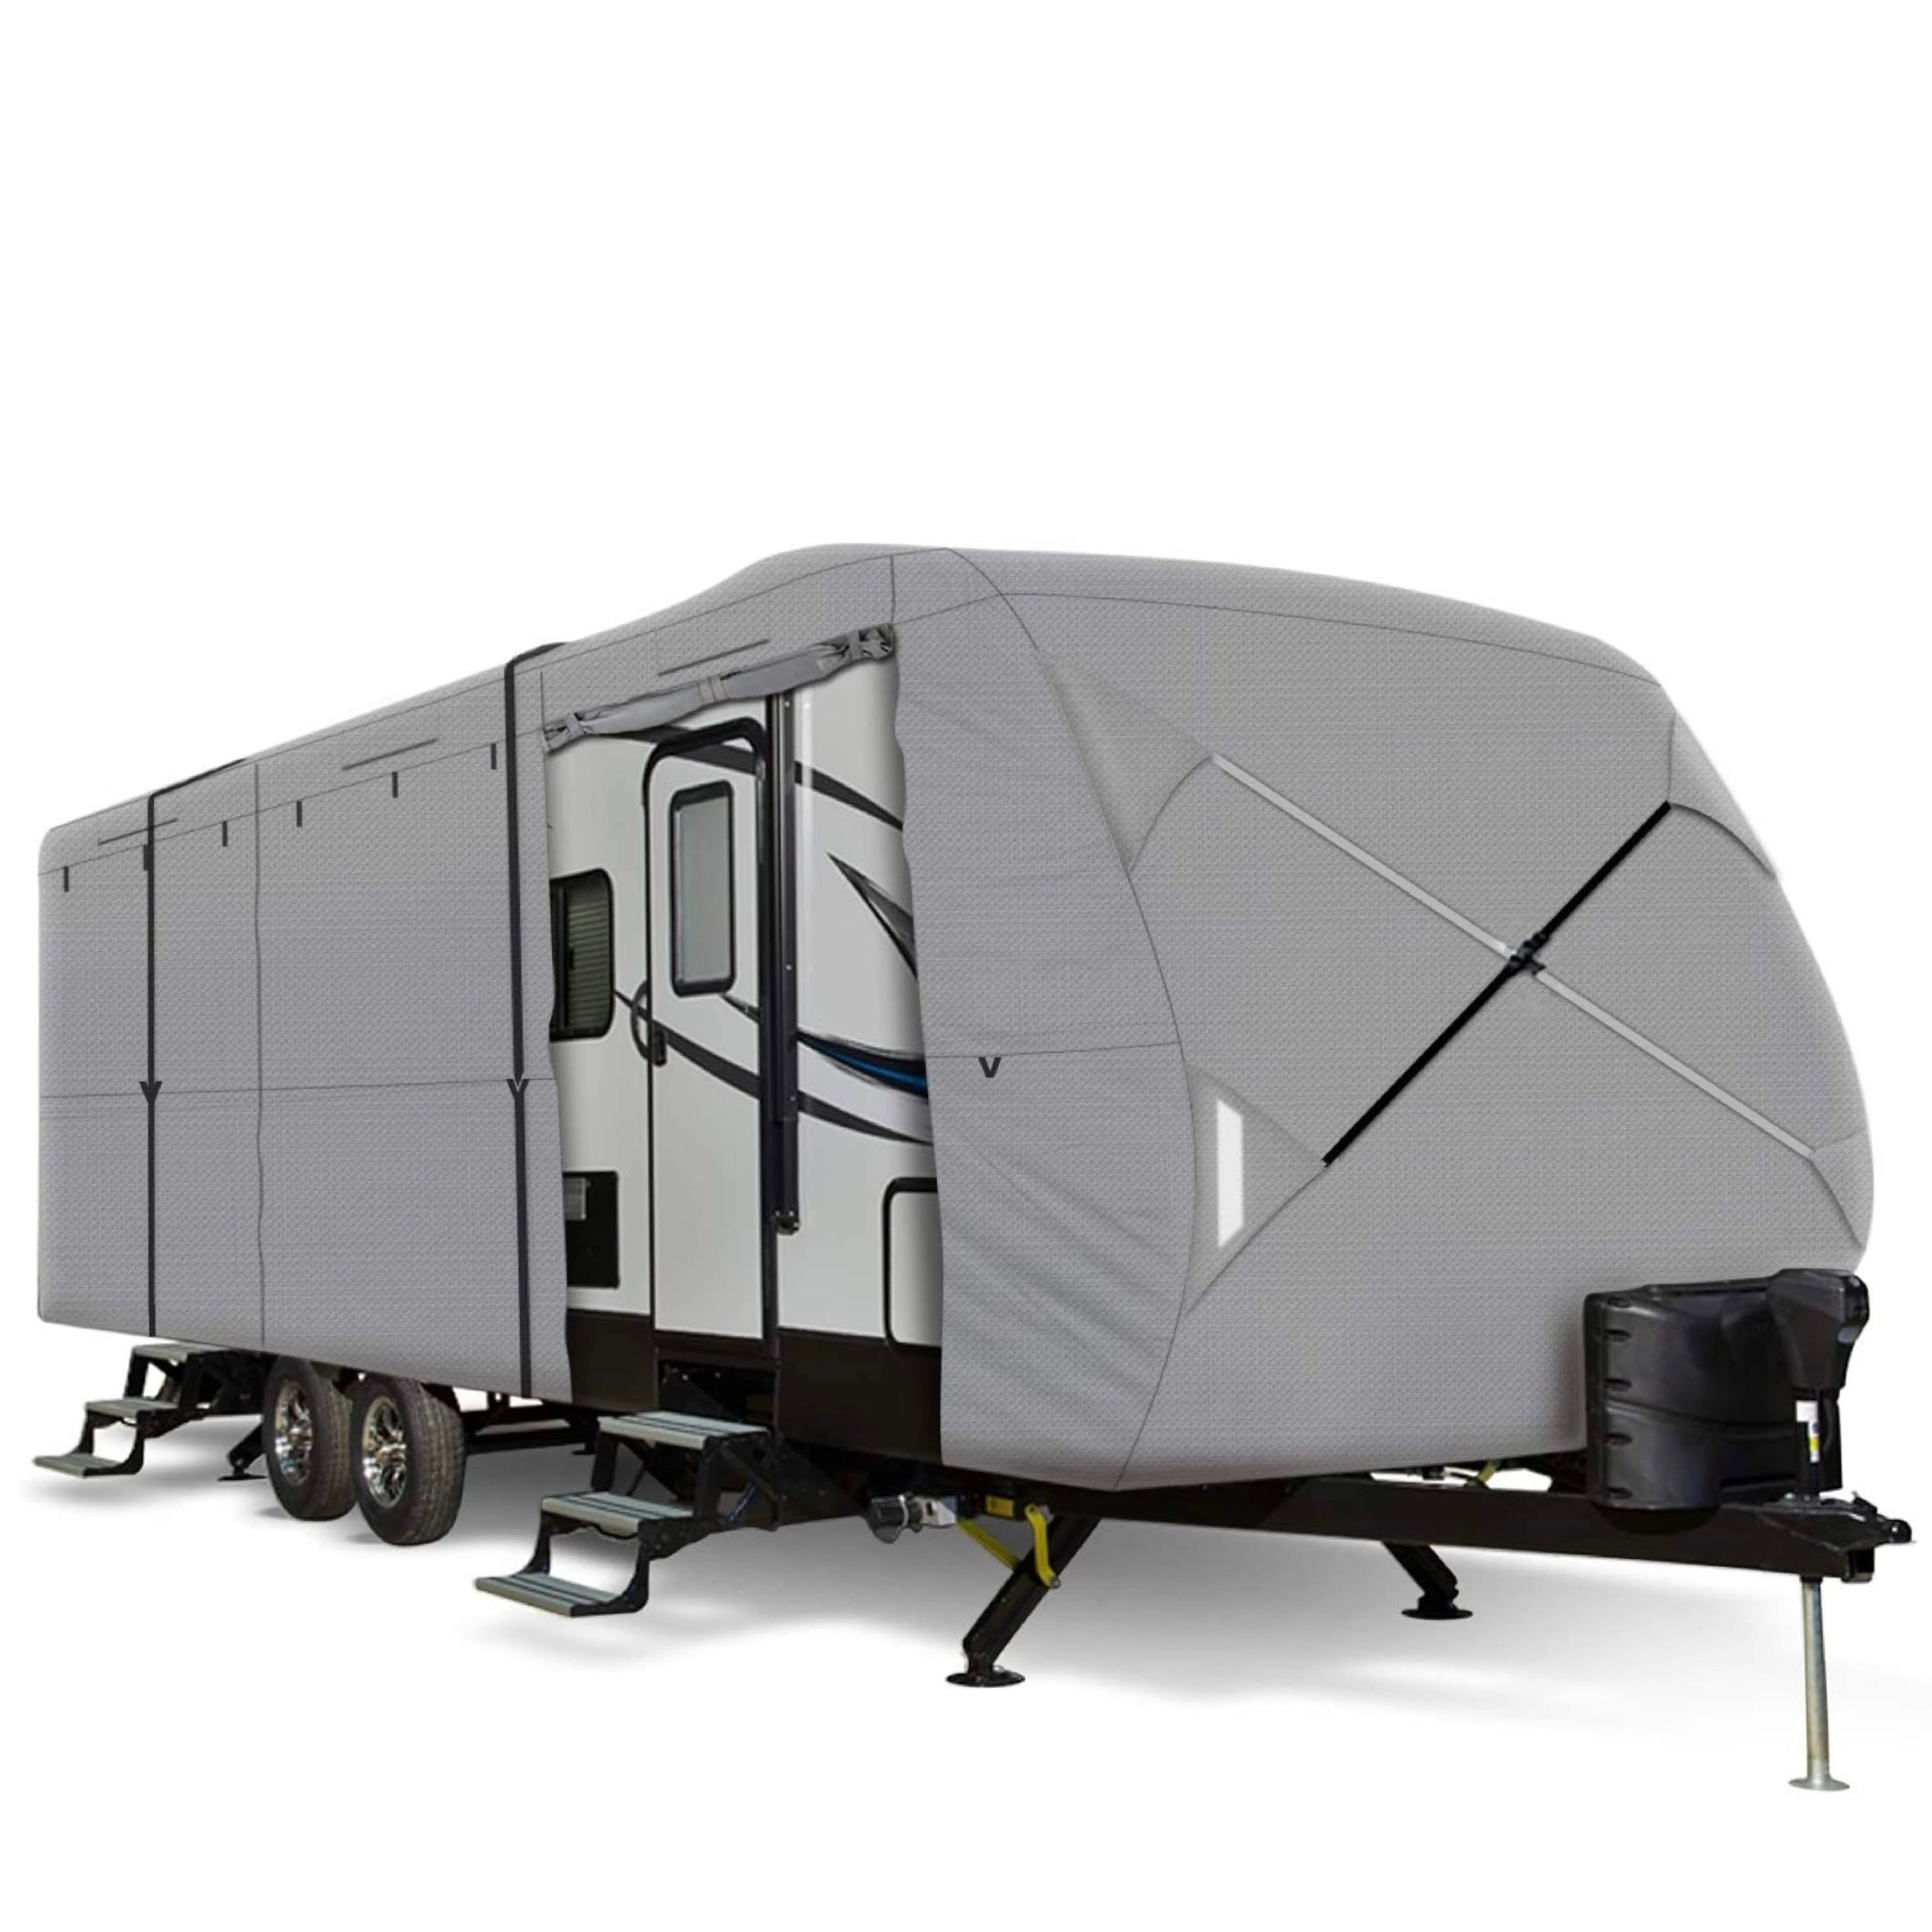 Leader Accessories Class A RV Cover Fits 40-42 3 Layer SFS Size 515x106x120 